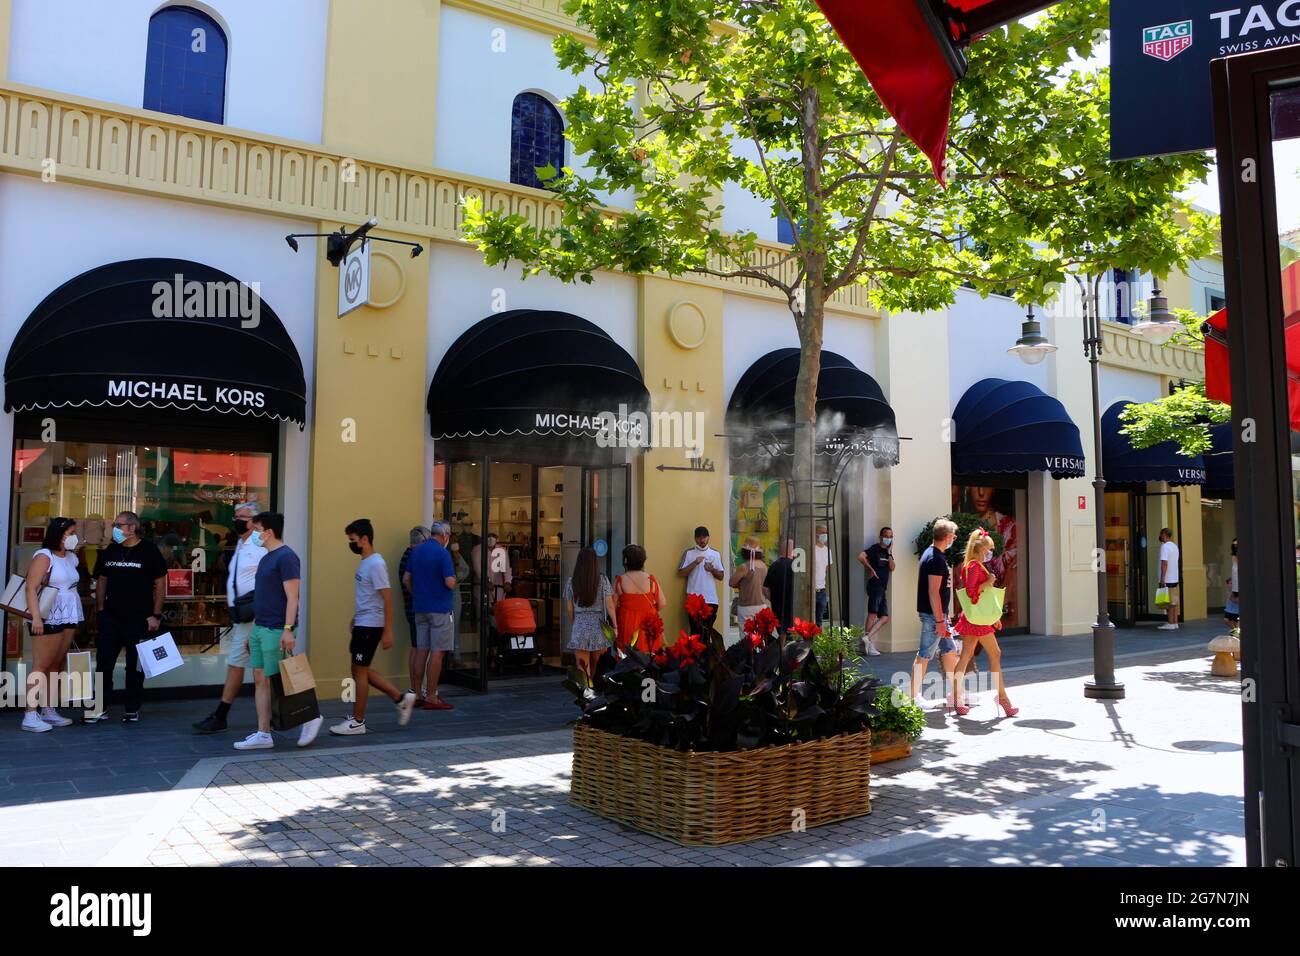 Michael Kors Shop front at Las Rozas outlet shopping Madrid Spain Stock  Photo - Alamy